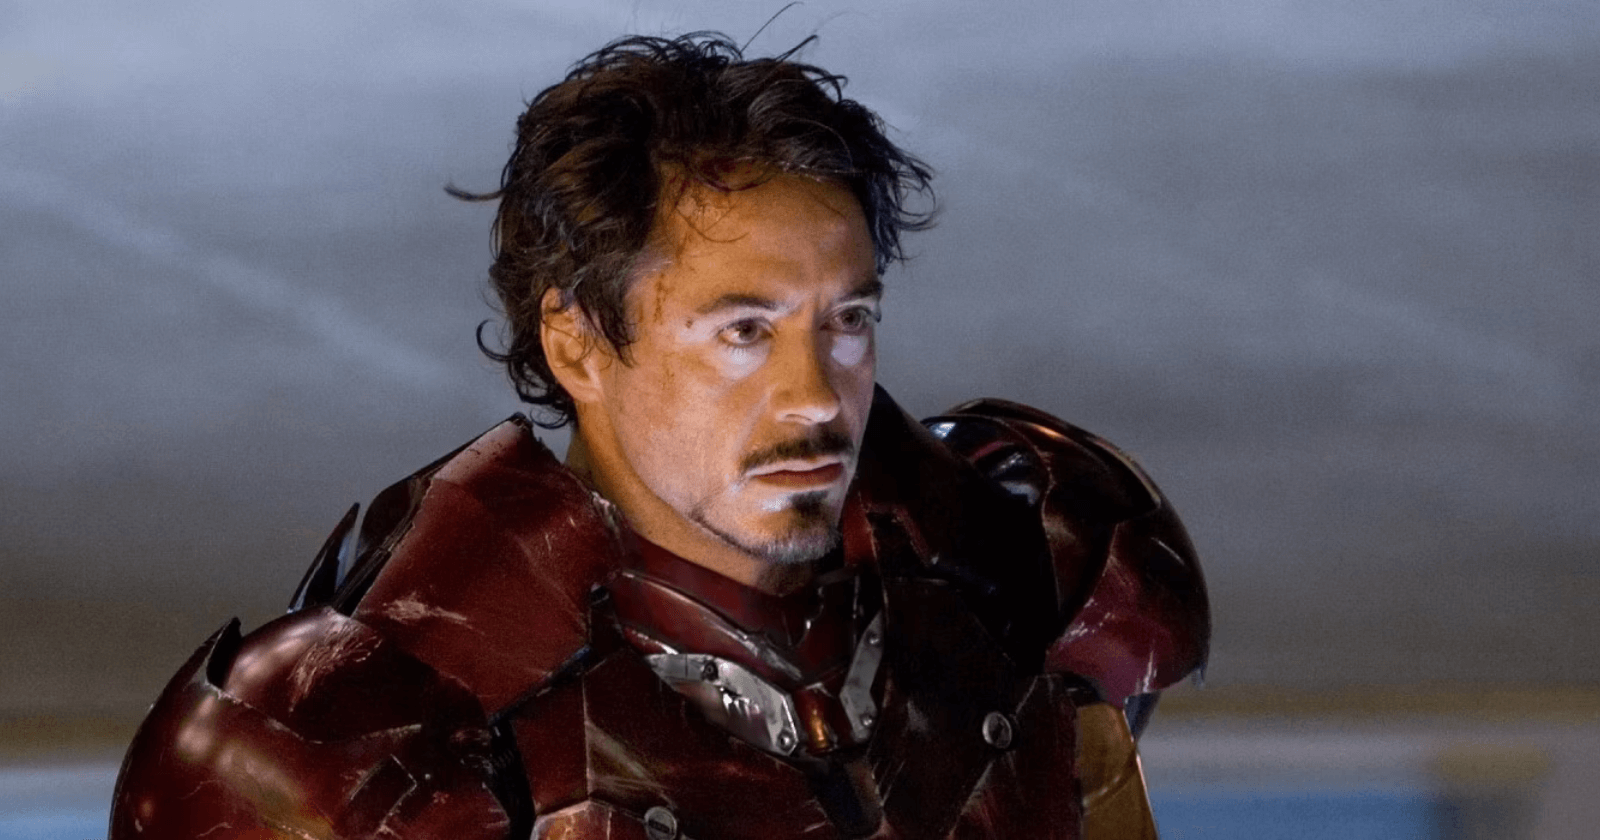 Iron Mans Character And Ethical Flaws